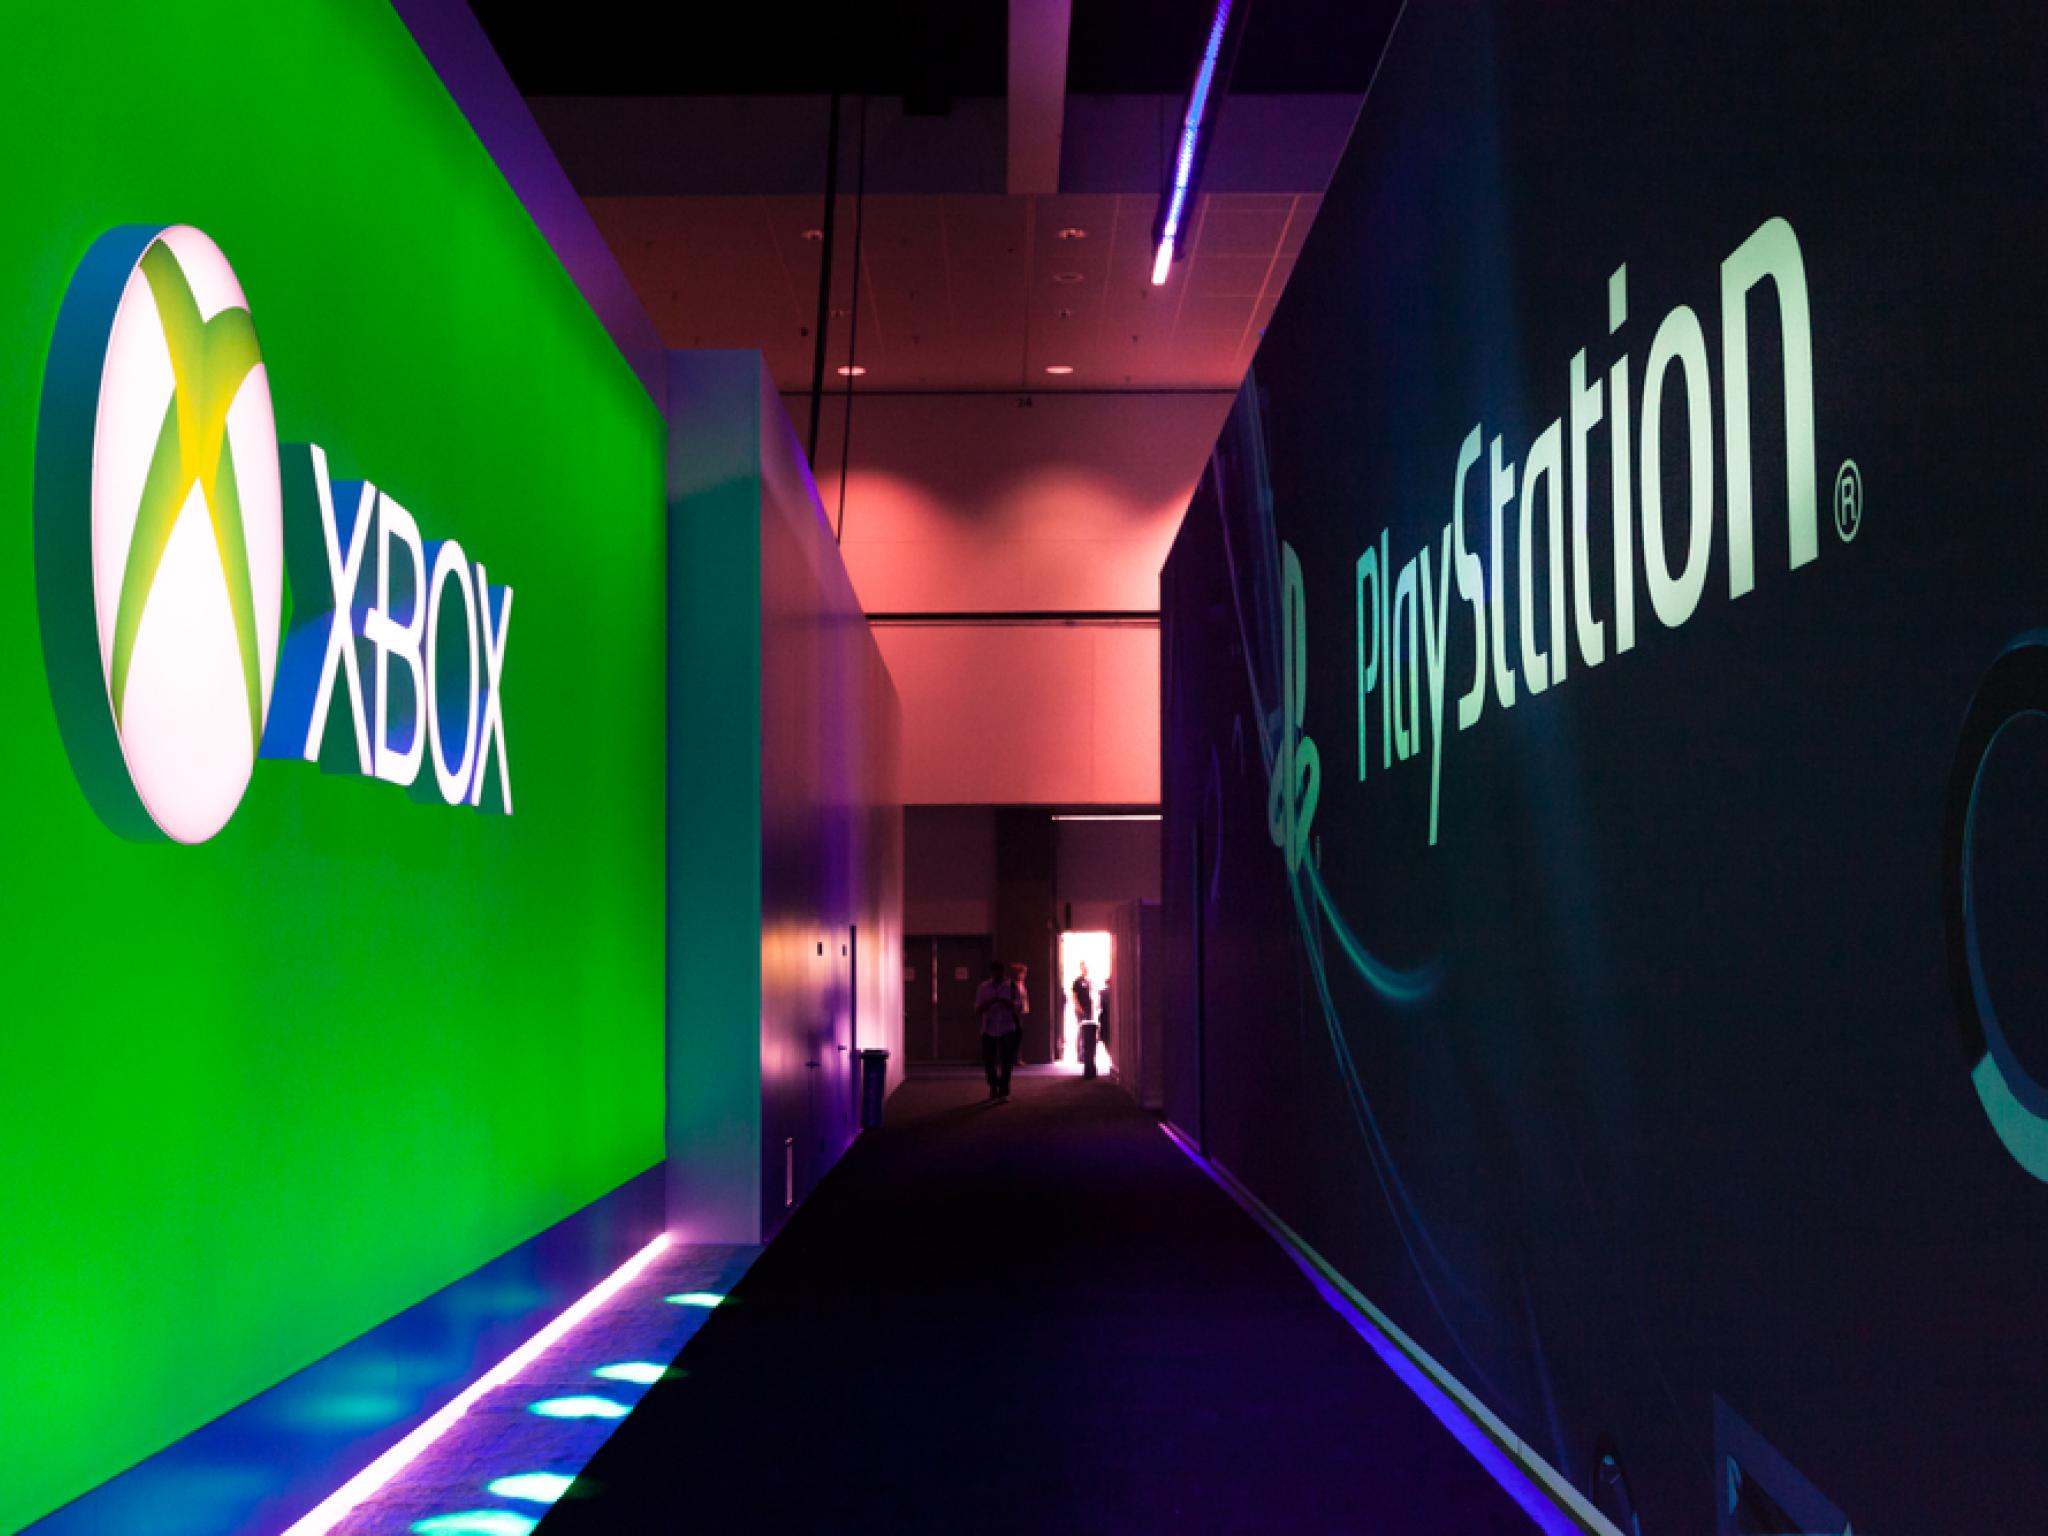  xbox-sales-plummet-in-europe-as-playstation-5-dominates-whats-the-impact-of-exclusive-titles 